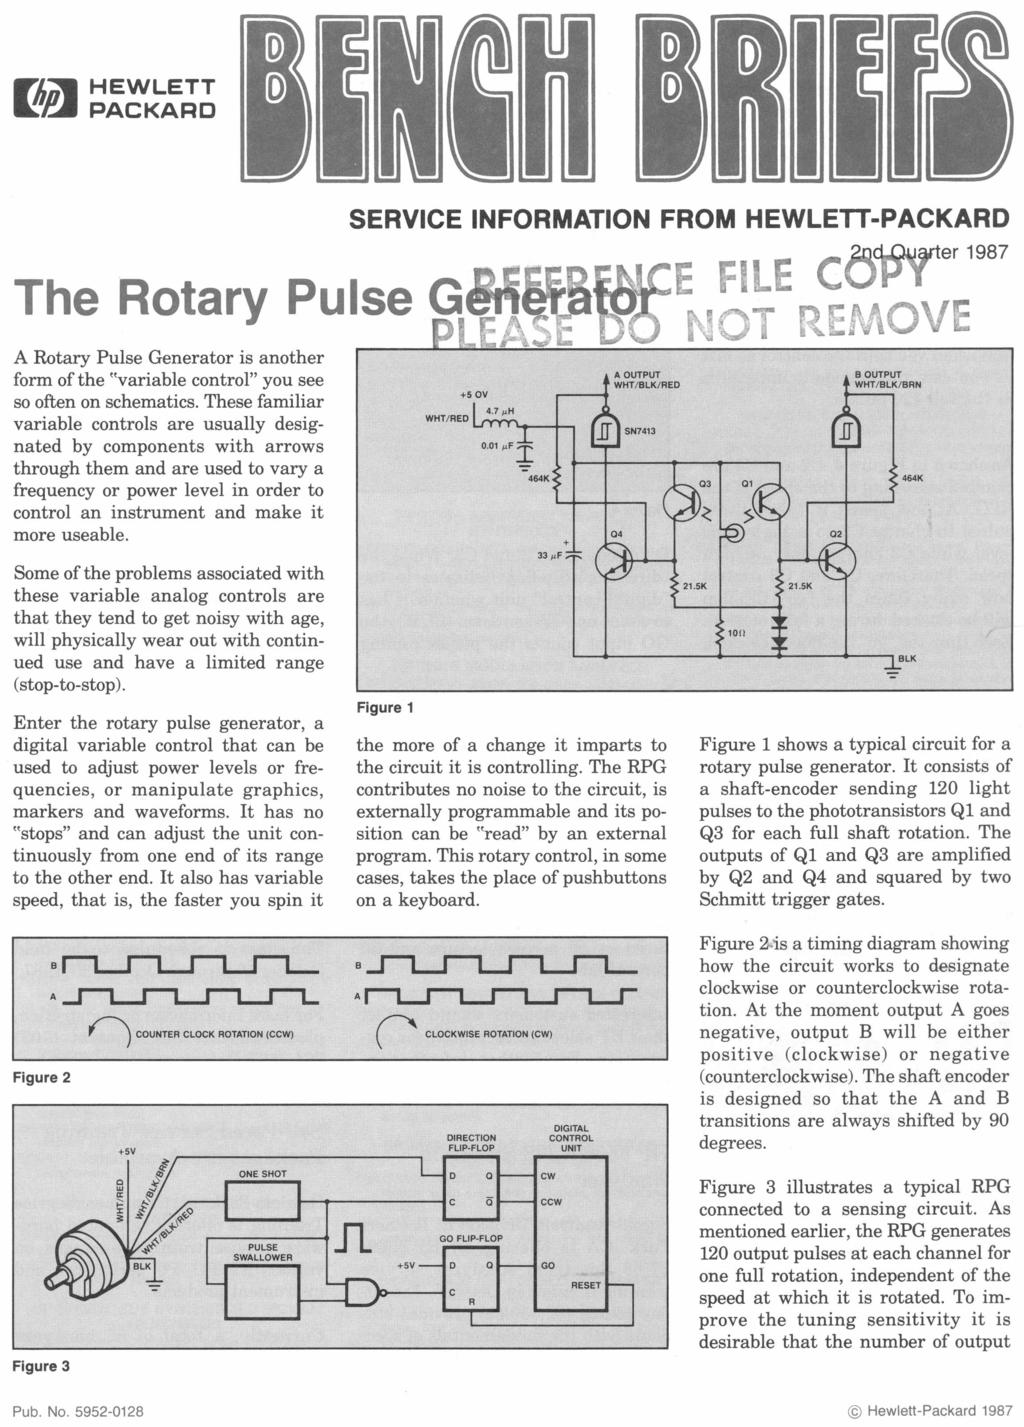 HEWLETT PAC KAR D SERVICE INFORMATION FROM HEWLETT-PACKARD A Rotary Pulse Generator is another form of the variable control you see so often on schematics.